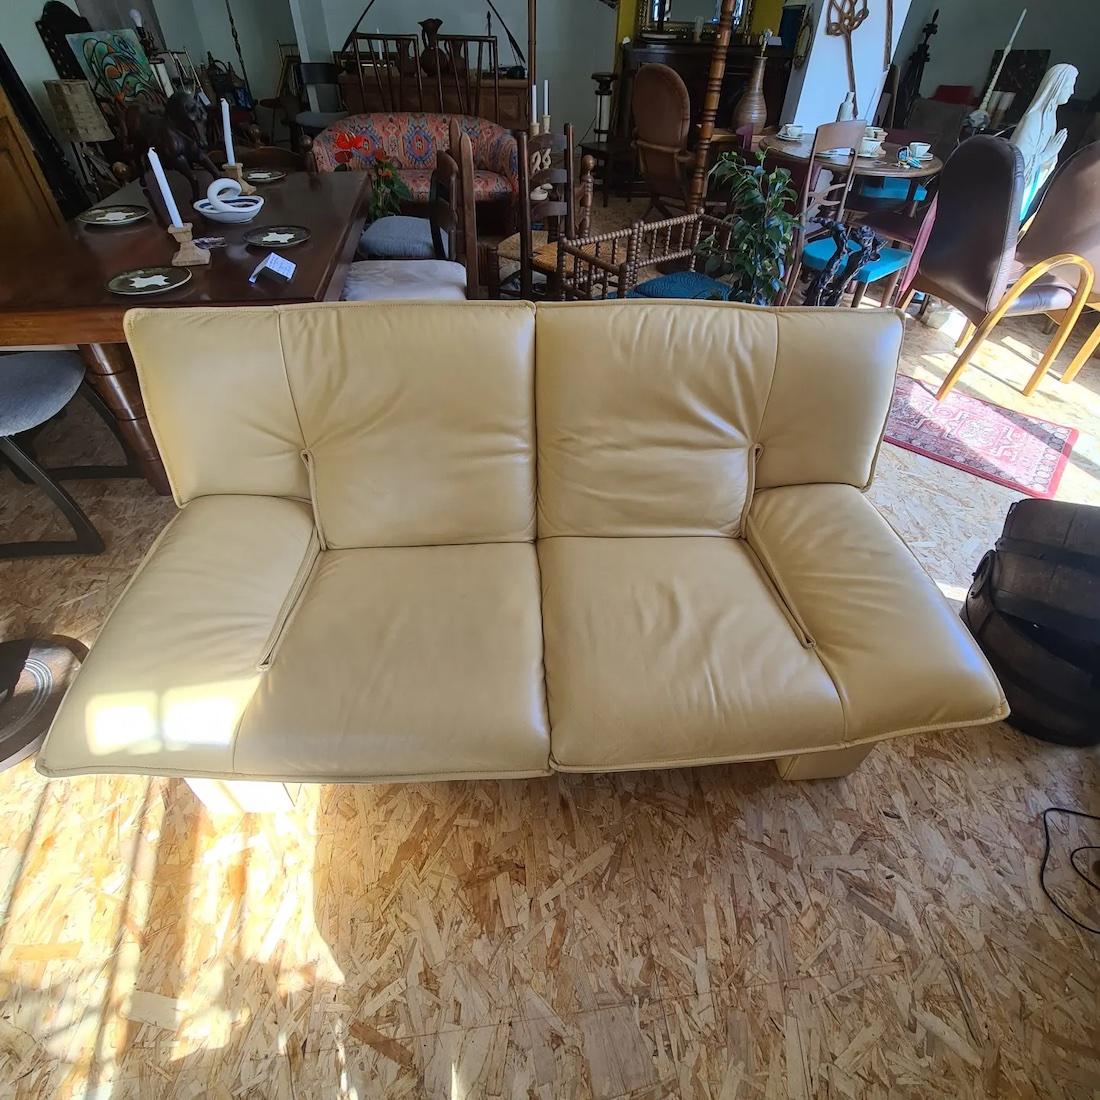 Magnificent post-modern Nicoletti Salotti sofa circa 1980 beige color, the leather is in very good condition and is very comfortable, a magnificent piece in a modern interior.


Postmodernism was born out of architectural criticism. Beginning in